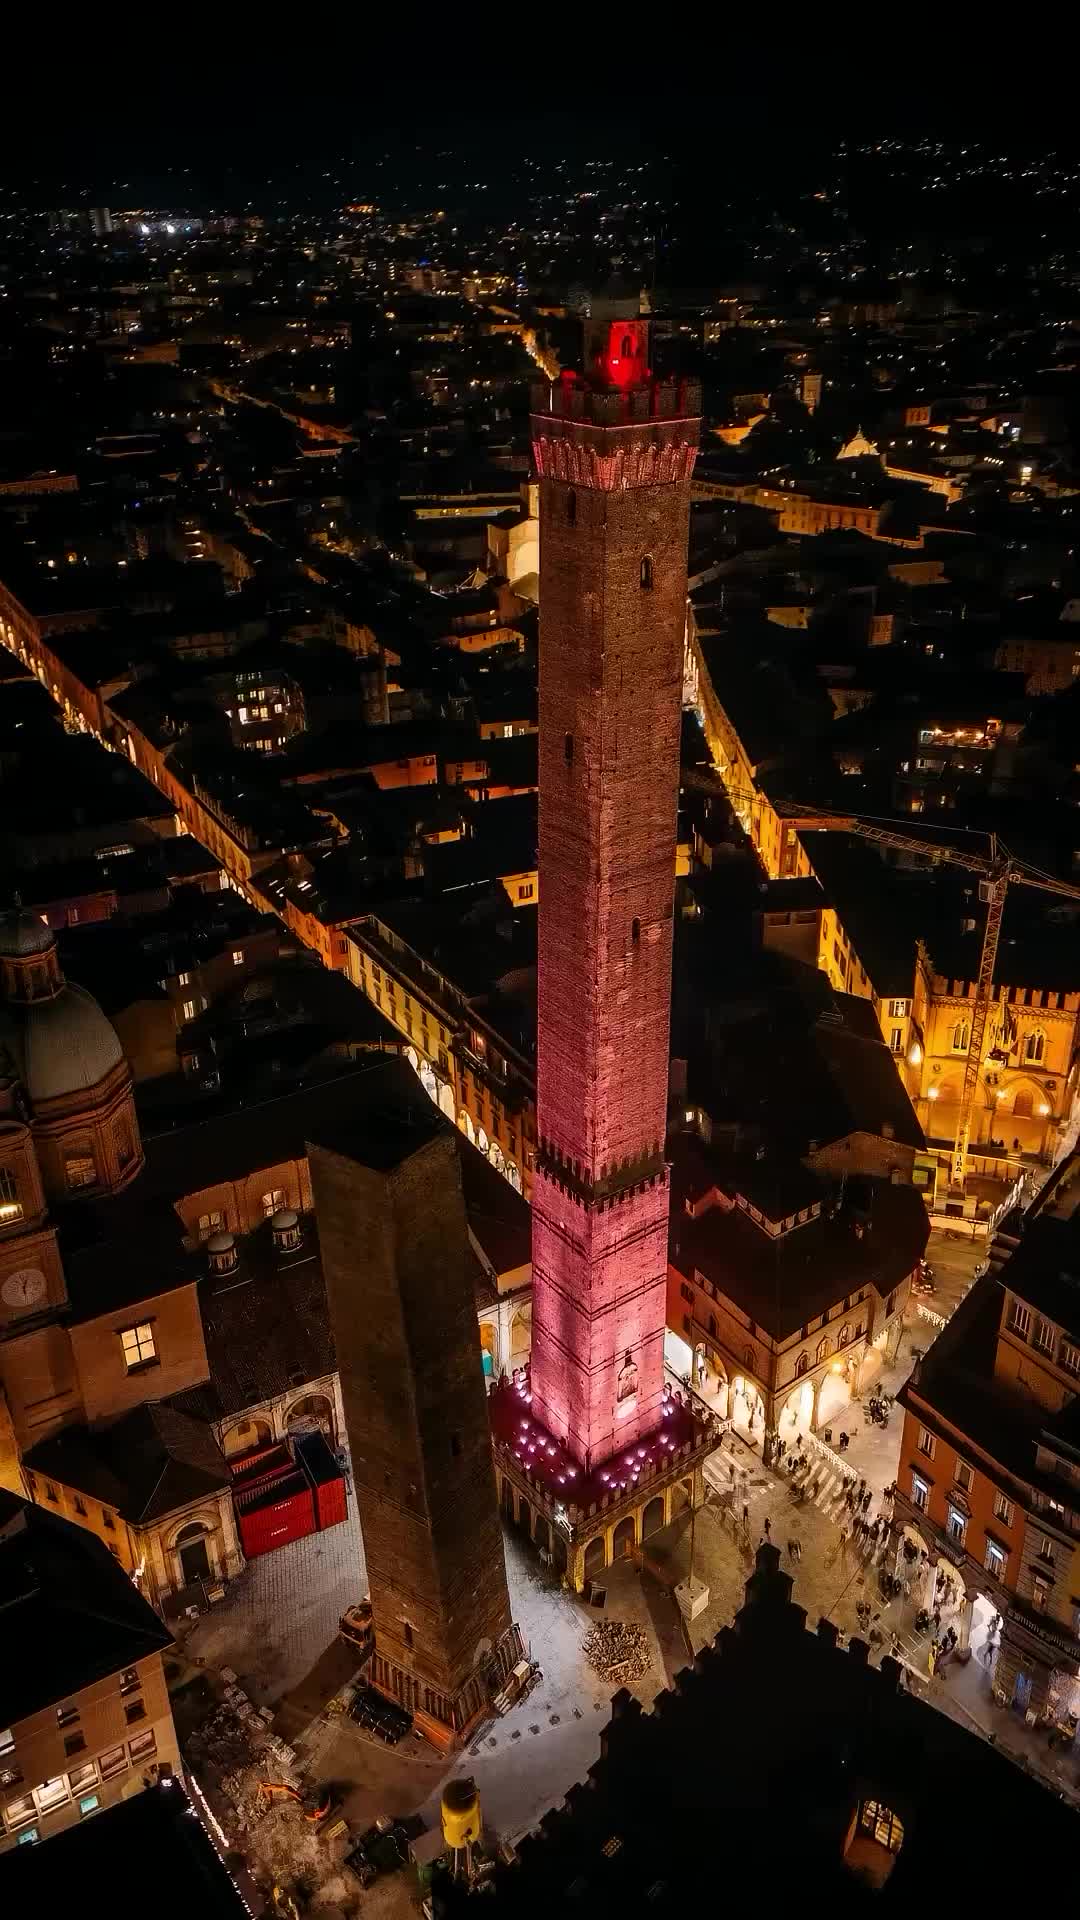 Play of Lights in Bologna: Garisenda & Asinelli Towers